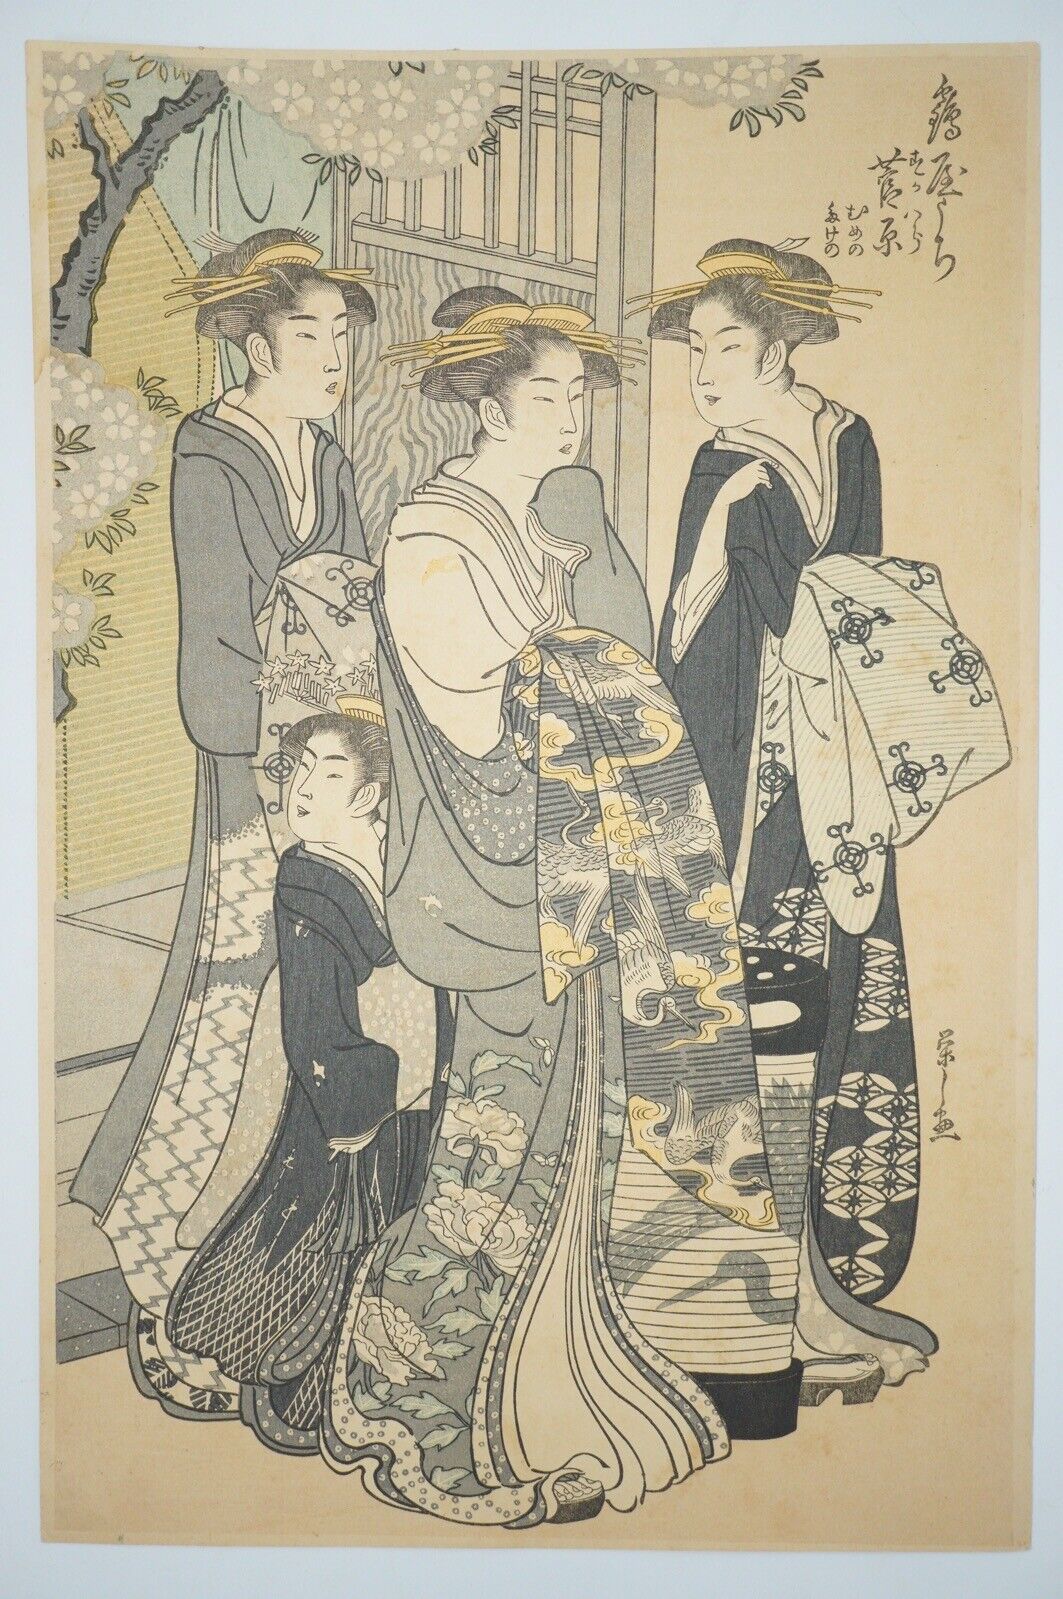 Vintage Woodblockprint Re-carved Ukyo-e by Hosoda Eishi from Japan 0721C6